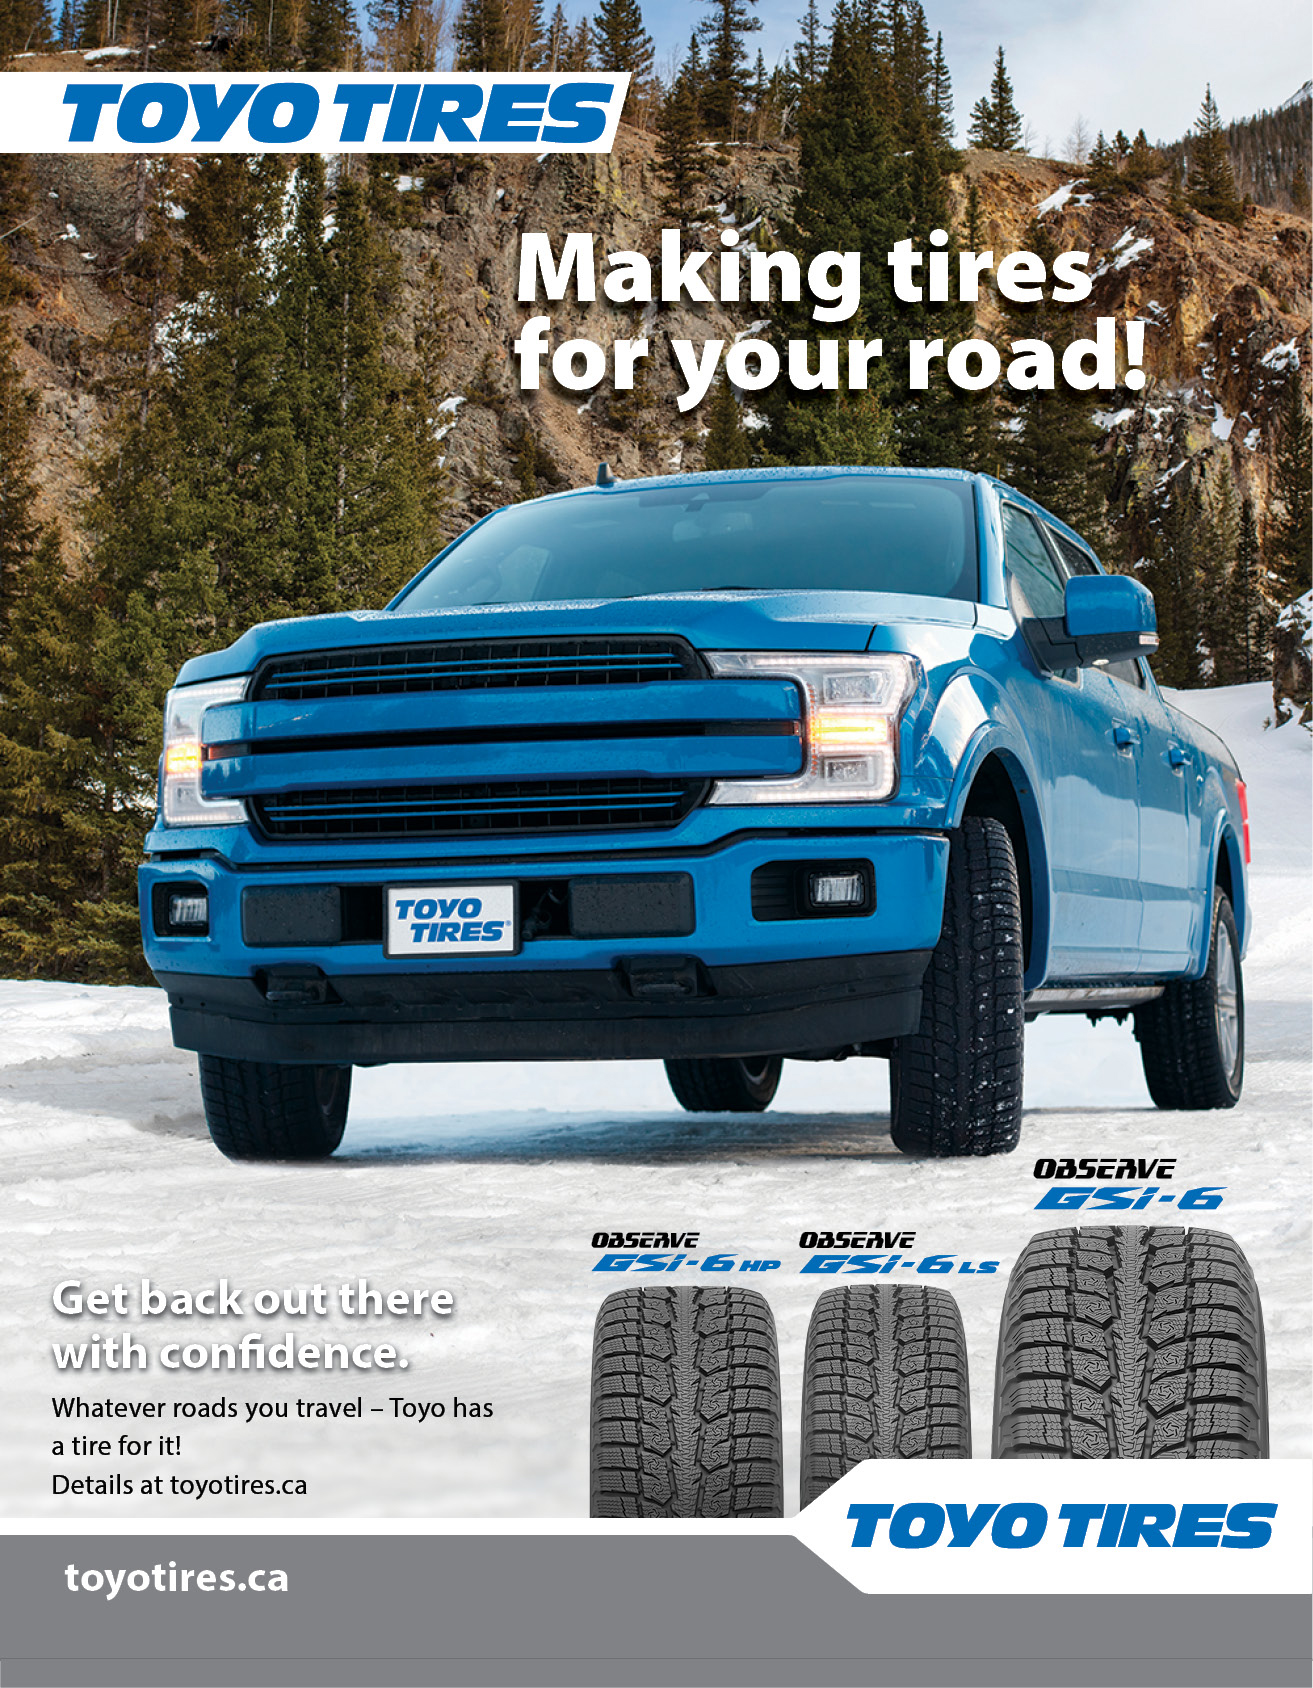 Toyo Tires Fall 2022 rebate event. Starts September 17th and ends